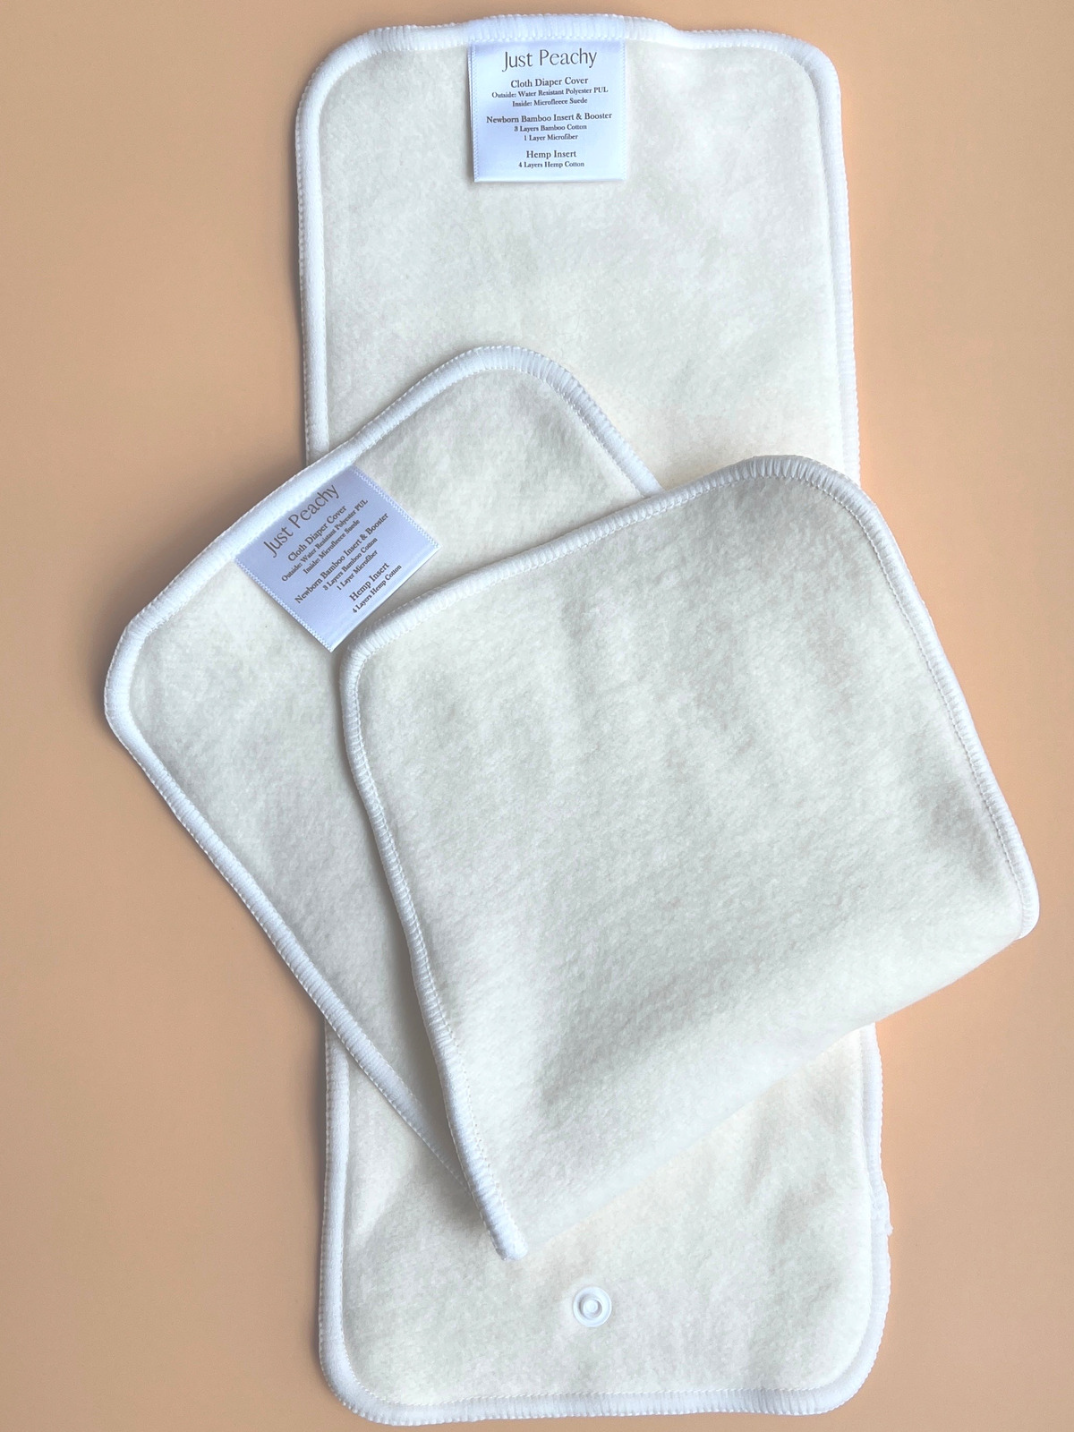 Just Peachy Hemp Cotton Full-Size Insert is always your best overnight solution, ideal for toddlers. For extra absorbency and longer stretches of sleep, use two Hemp Cotton Inserts, one inserted into the Cloth Diaper pocket and one on top.